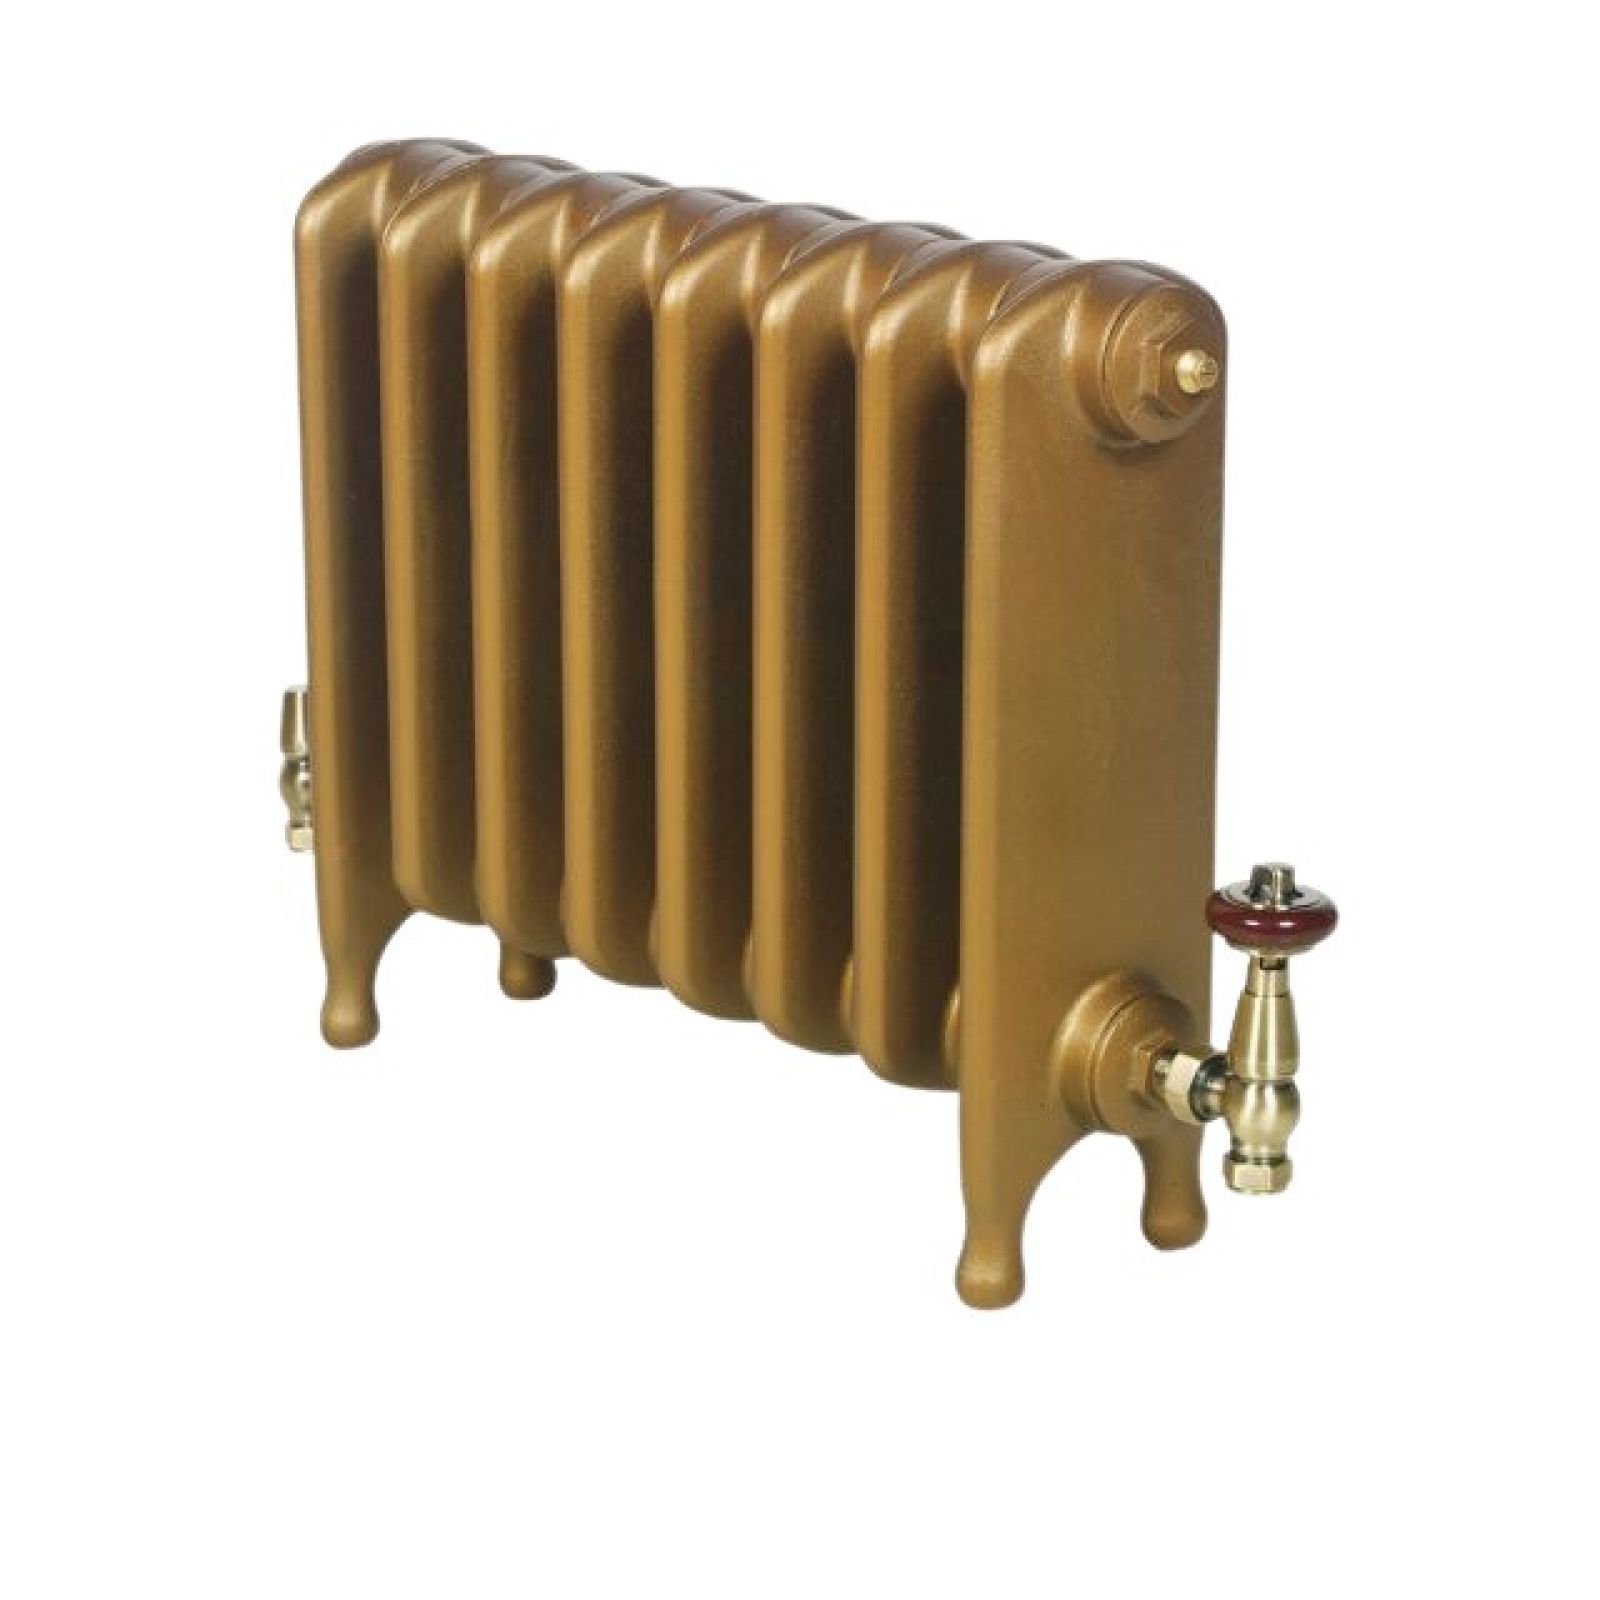 Cliveden Electric Radiator 440mm high